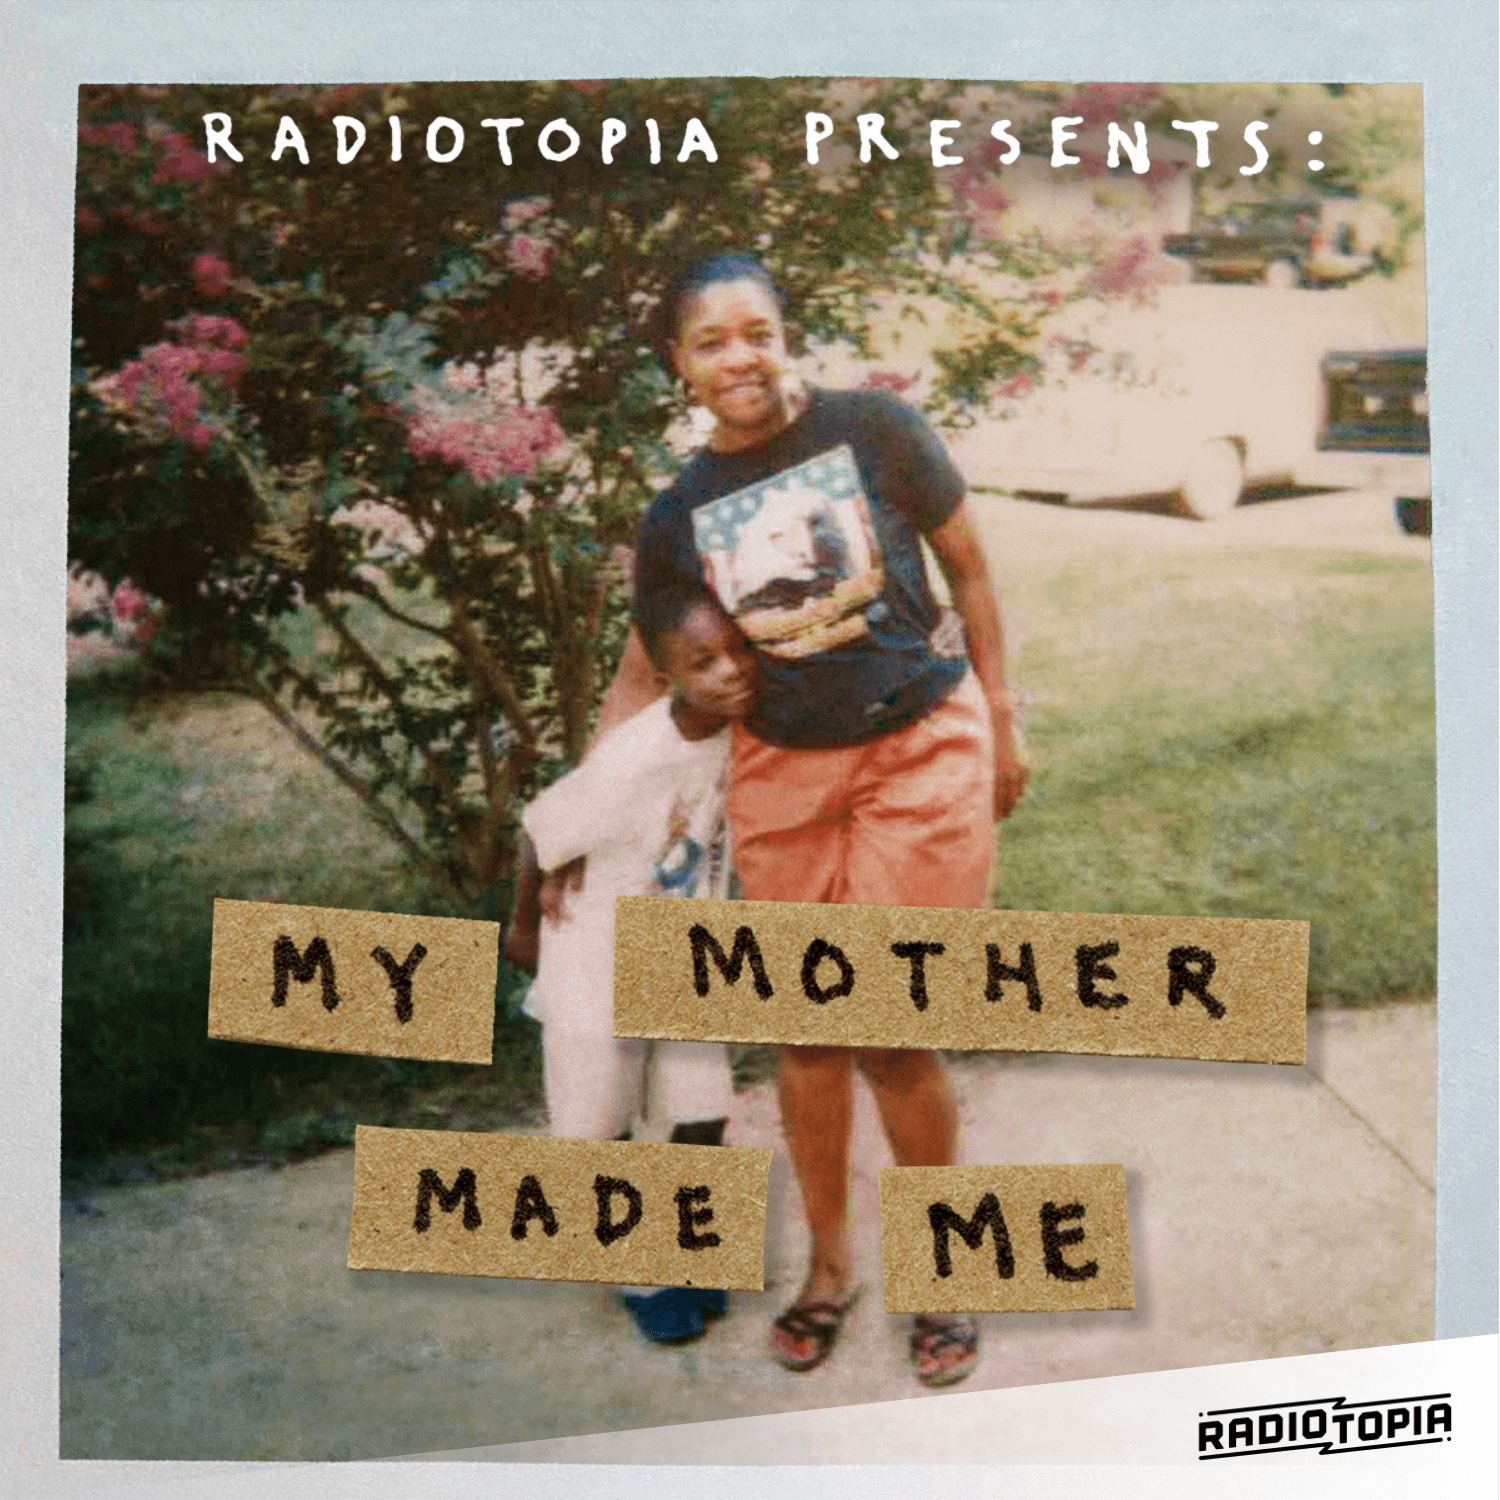 Thumbnail for "Radiotopia Presents: My Mother Made Me ".